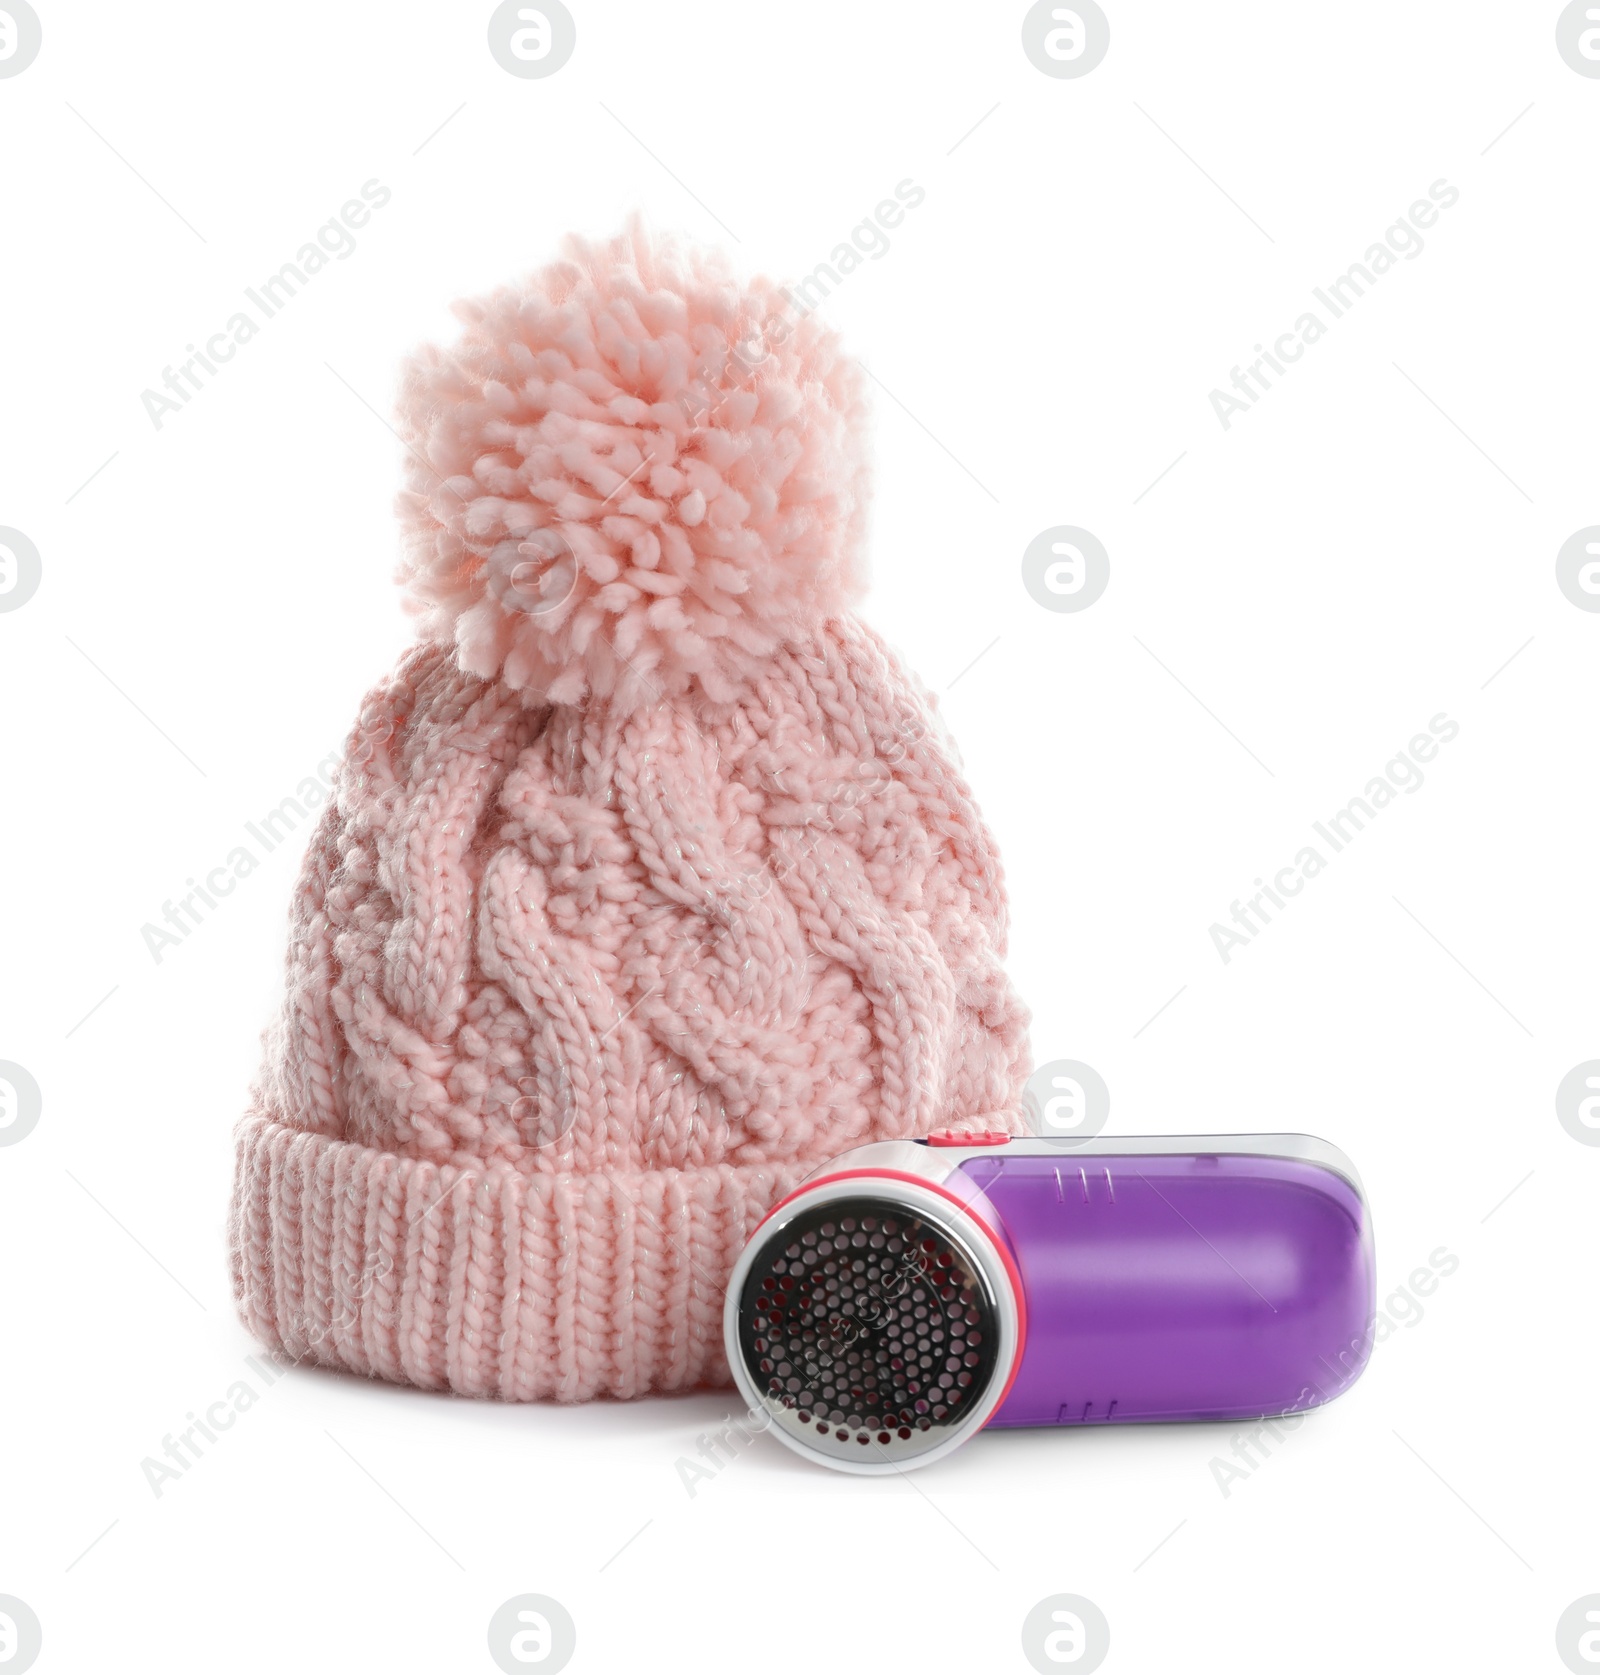 Photo of Modern fabric shaver and woolen hat on white background